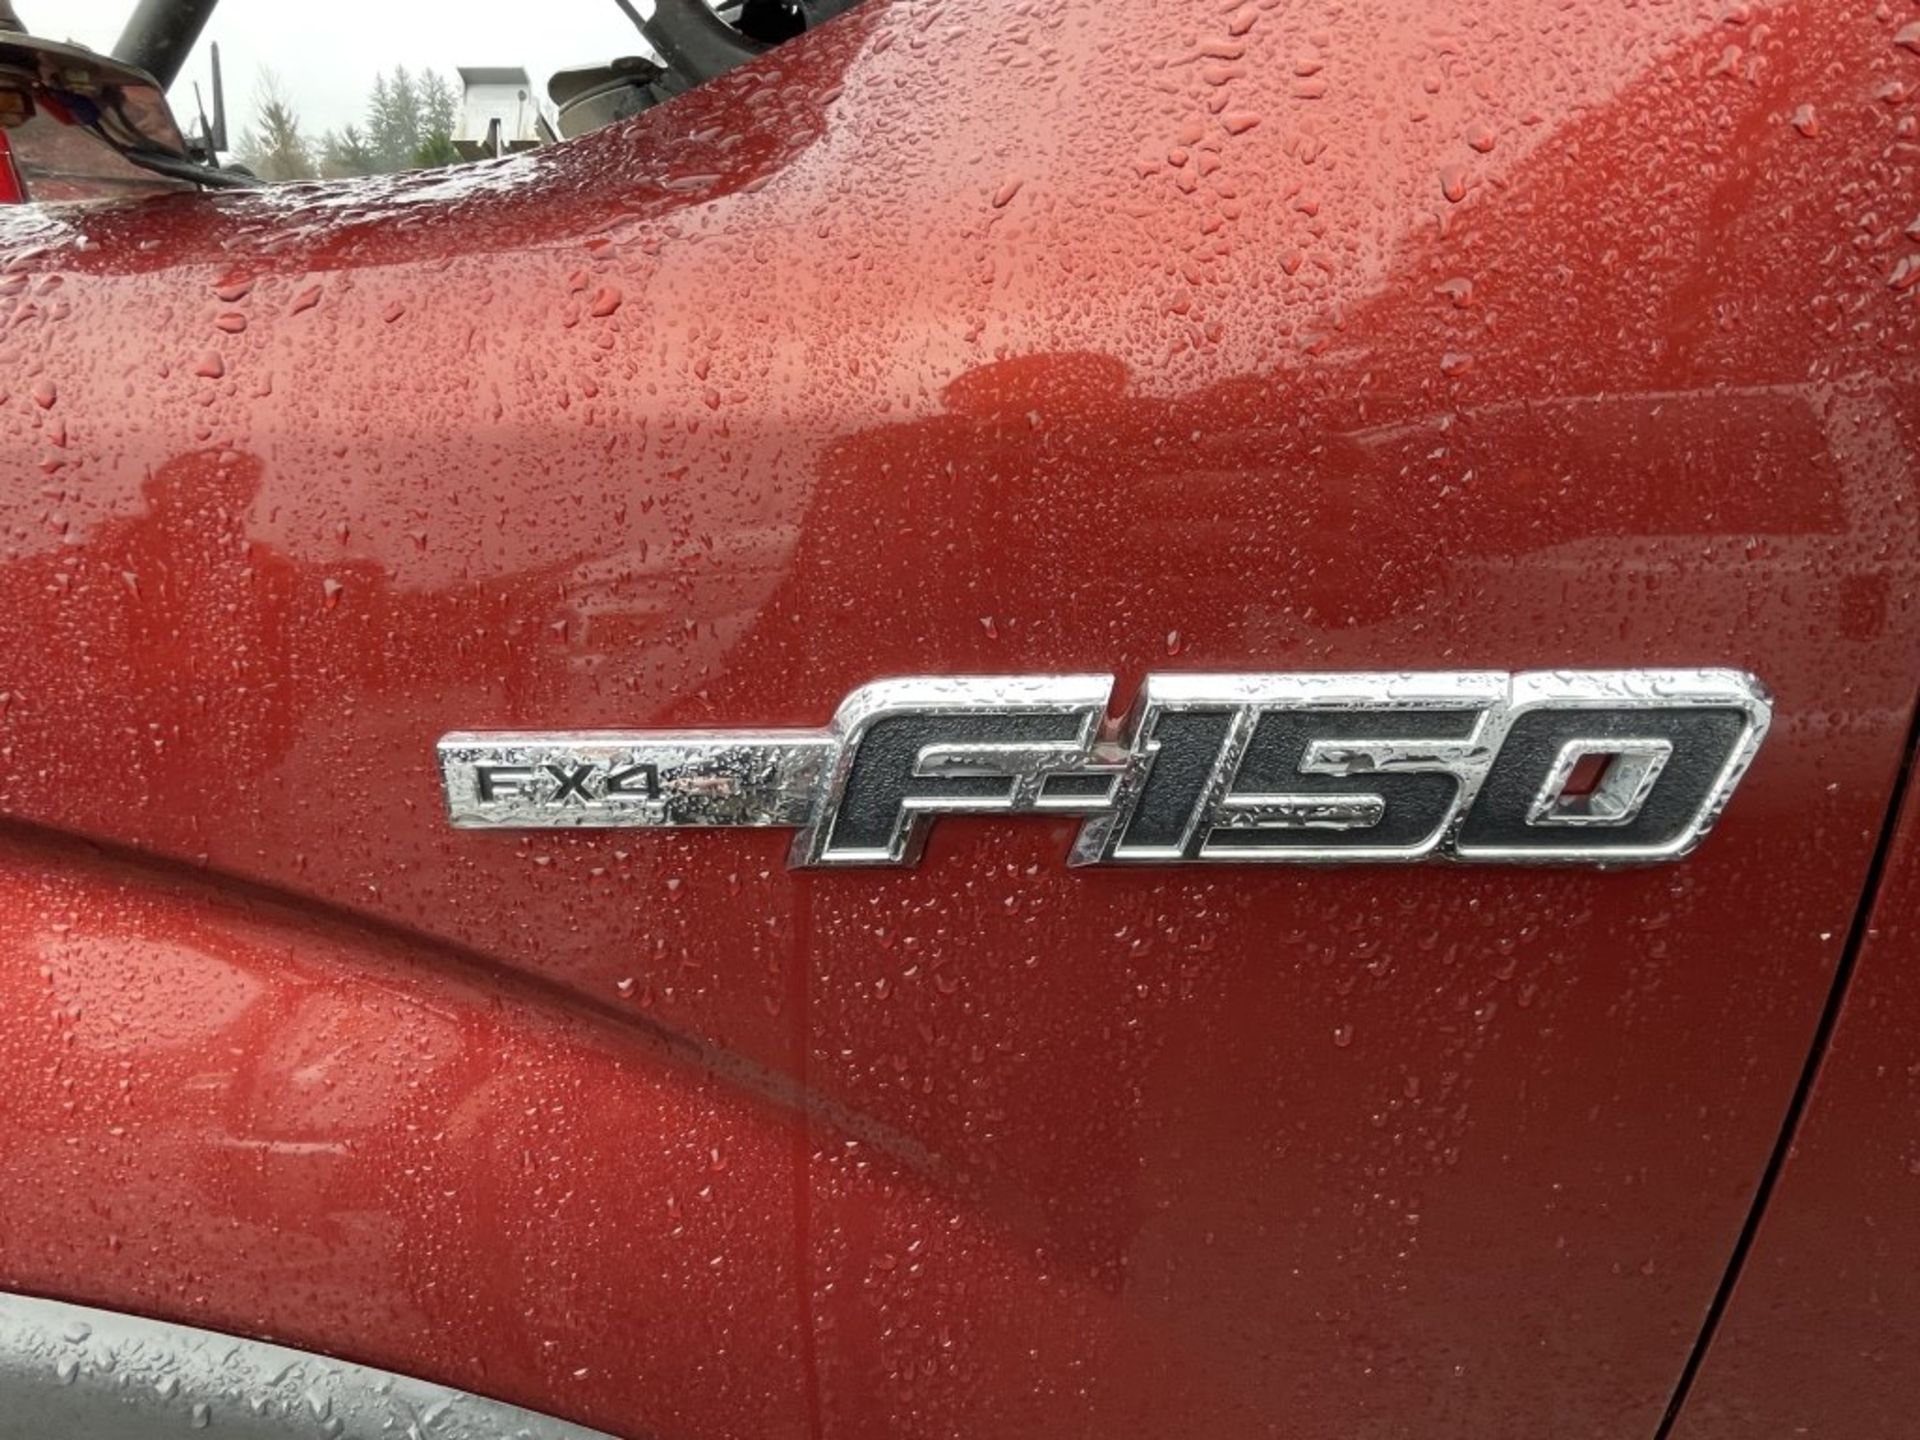 2014 Ford F150 Crew Cab Pickup - Image 14 of 17